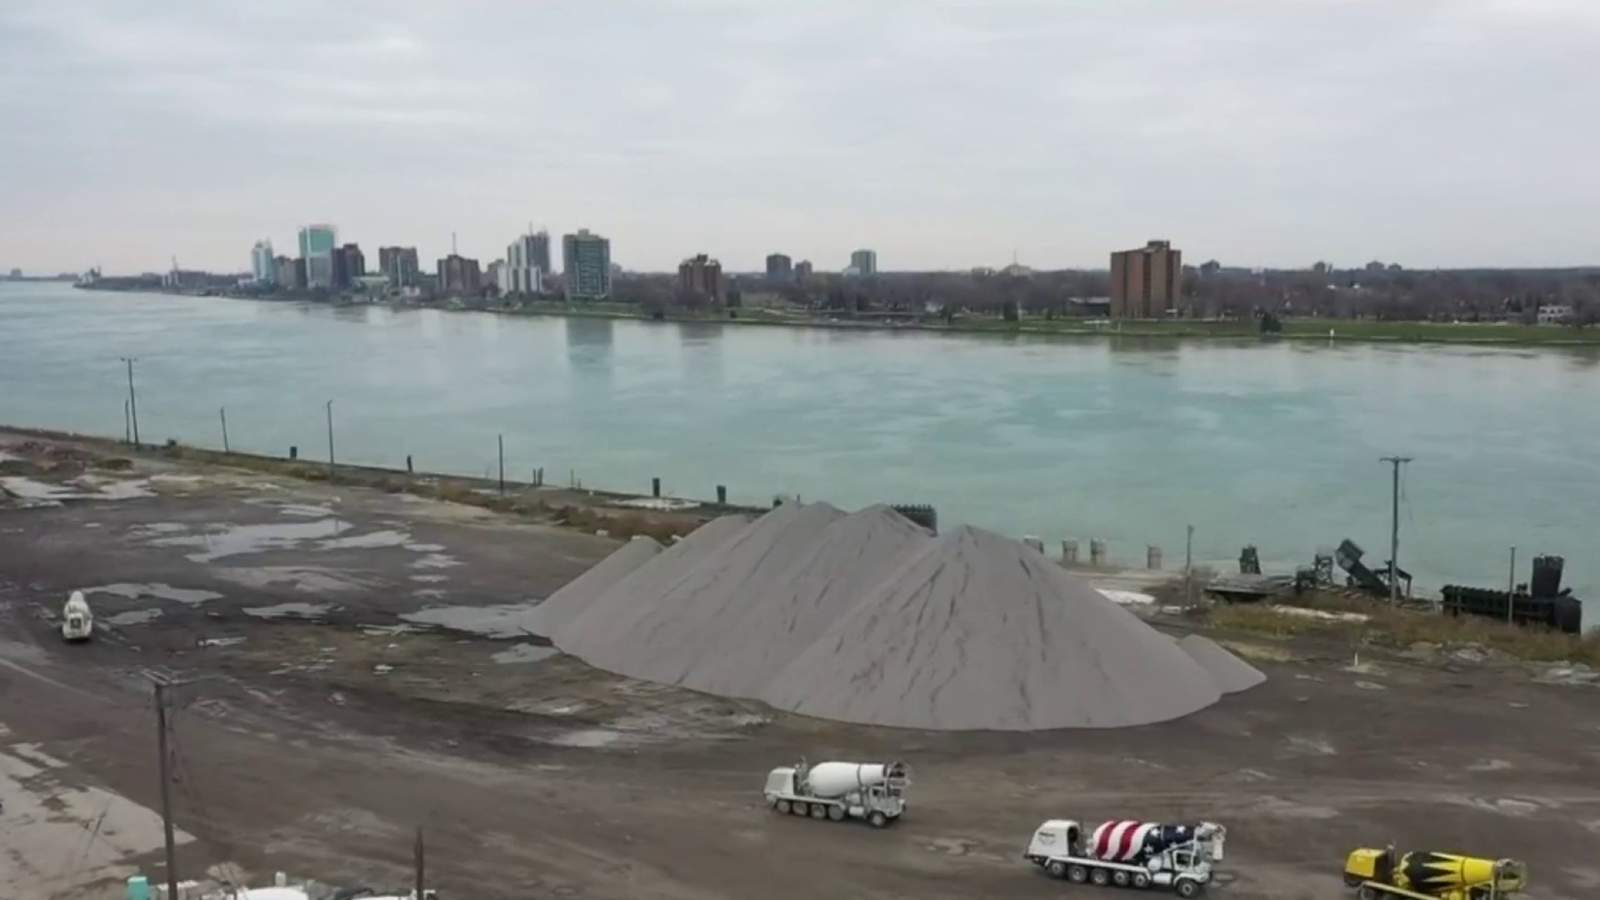 Seawall damage puts Detroit River at risk, city issues tickets that are not being paid